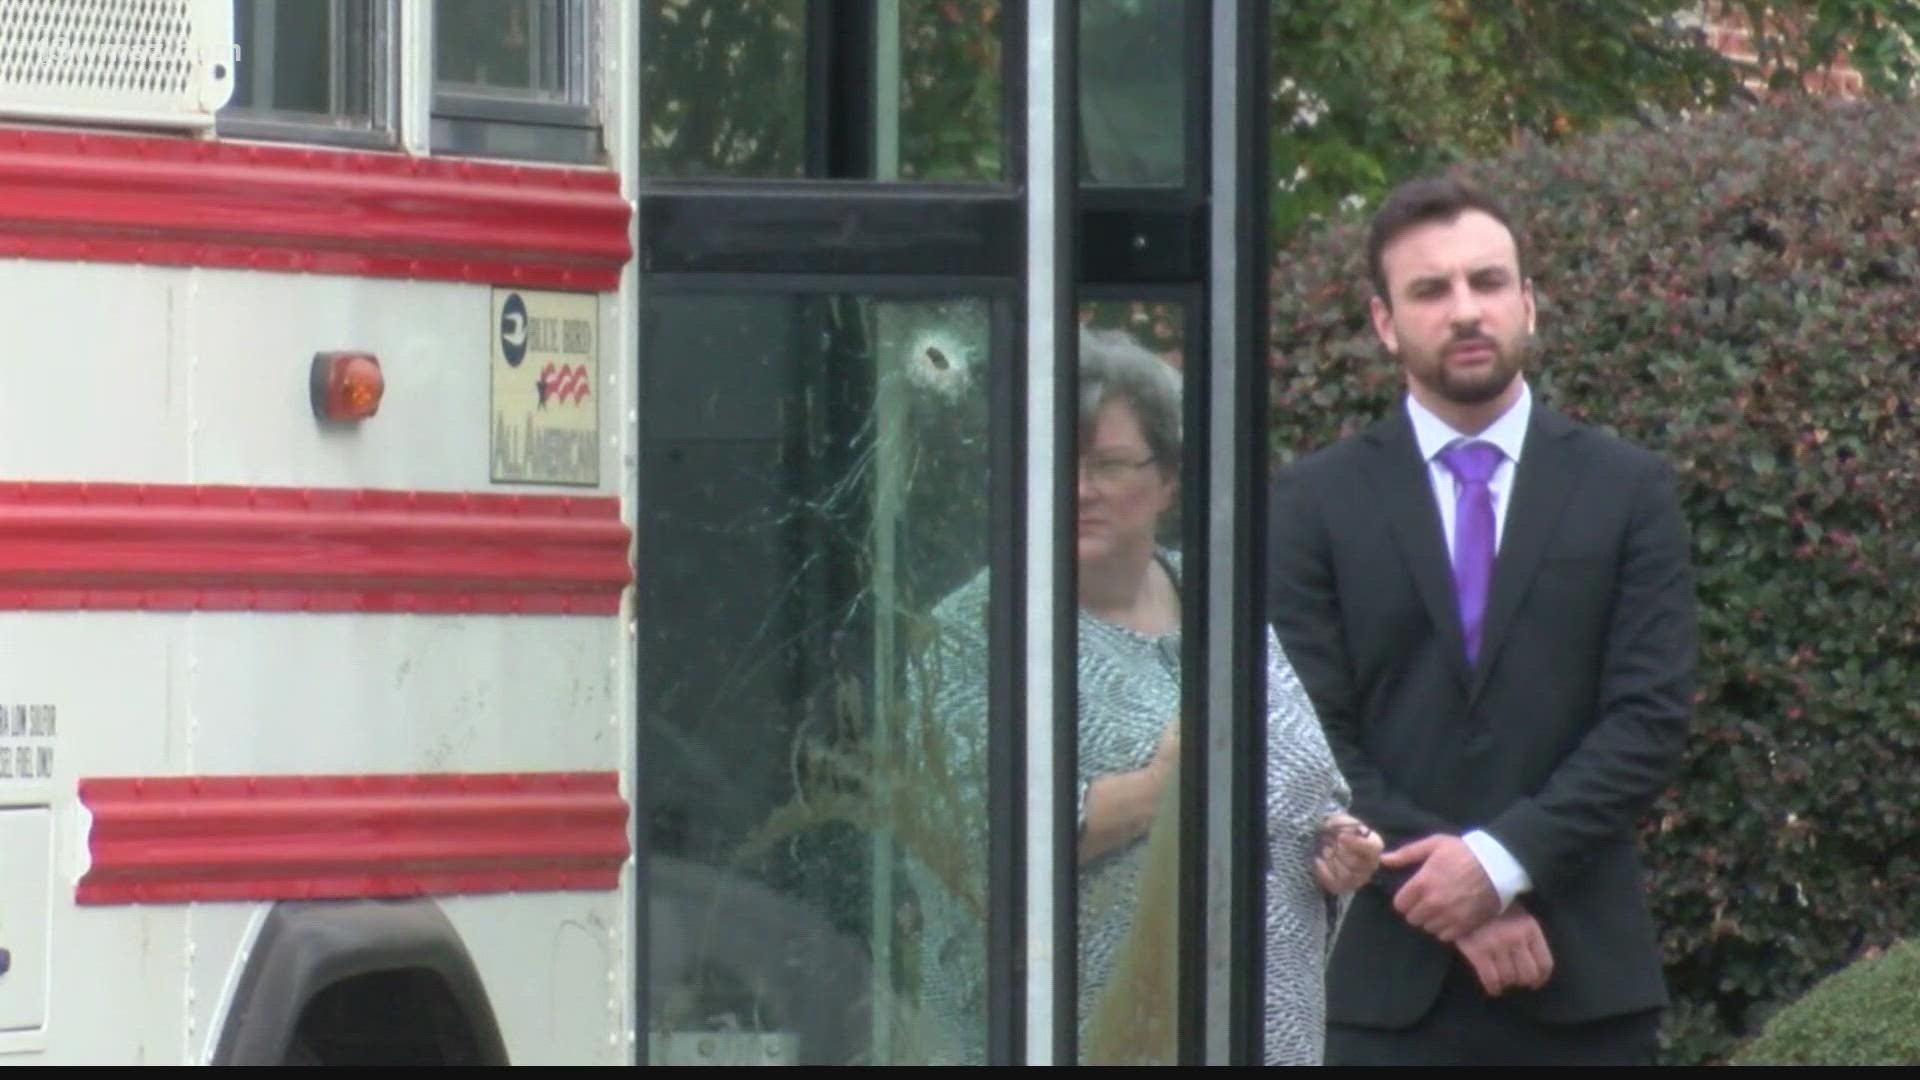 Jurors got a look at the prison bus where officers Curtis Billue and Christopher Monica died, and then Rowe's attorneys asked for a mistrial.